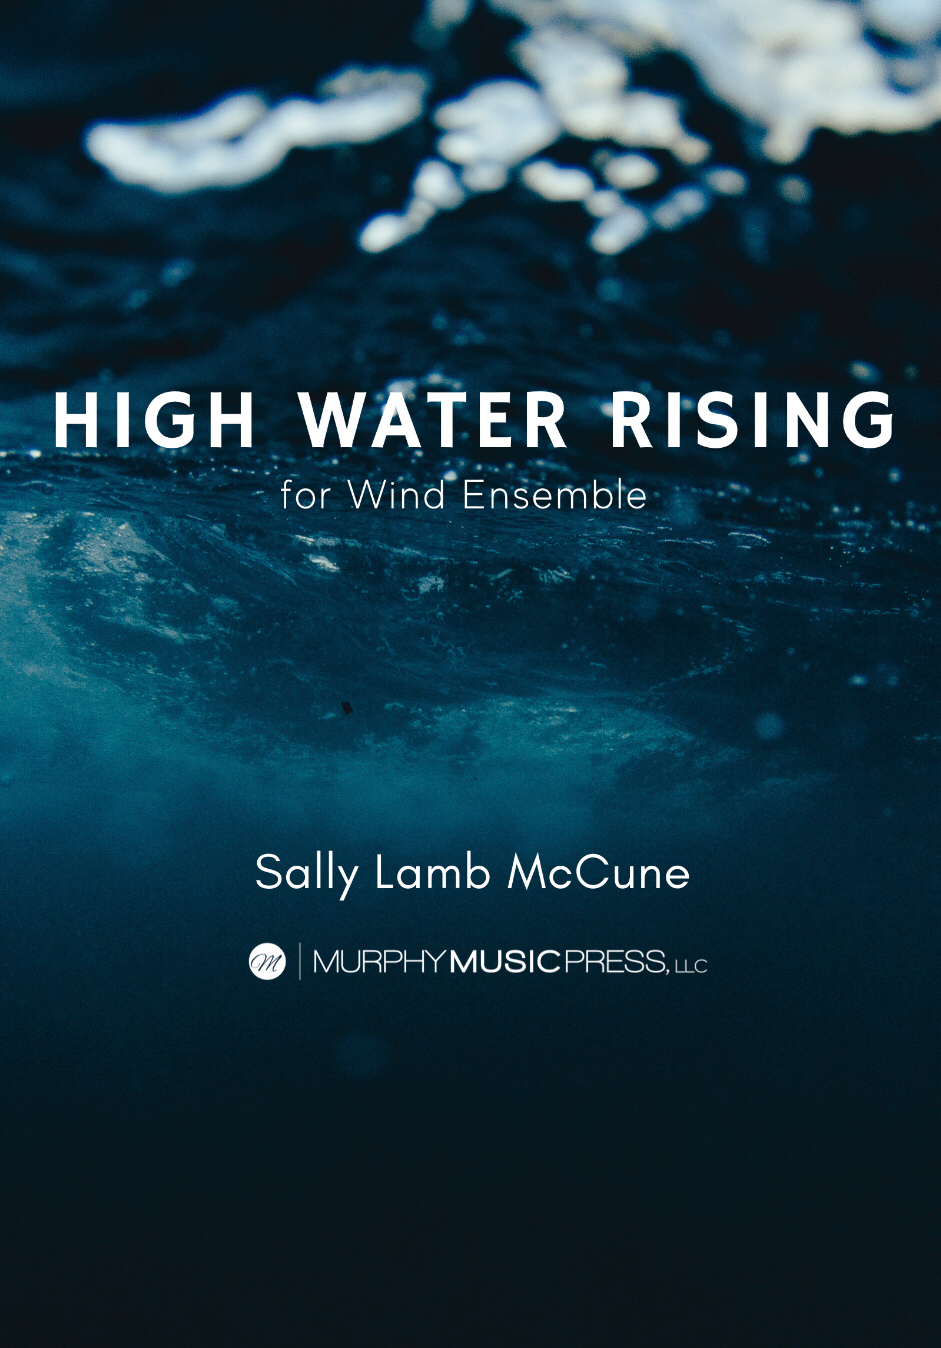 High Water Rising (Score Only) by Sally Lamb McCune